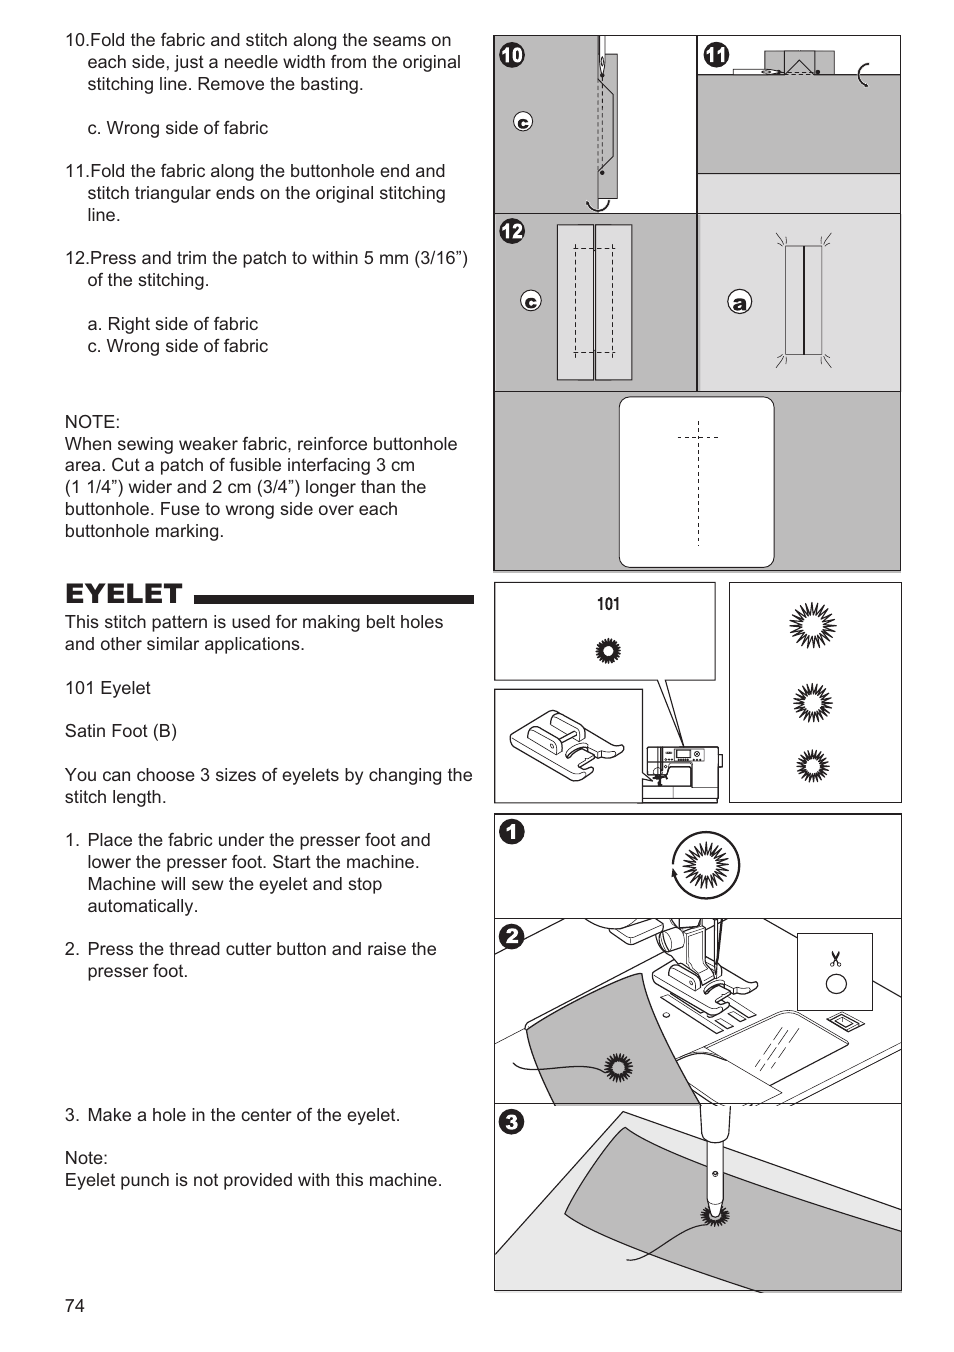 Eyelet | SINGER 9980 QUANTUM STYLIST User Manual | Page 74 / 108